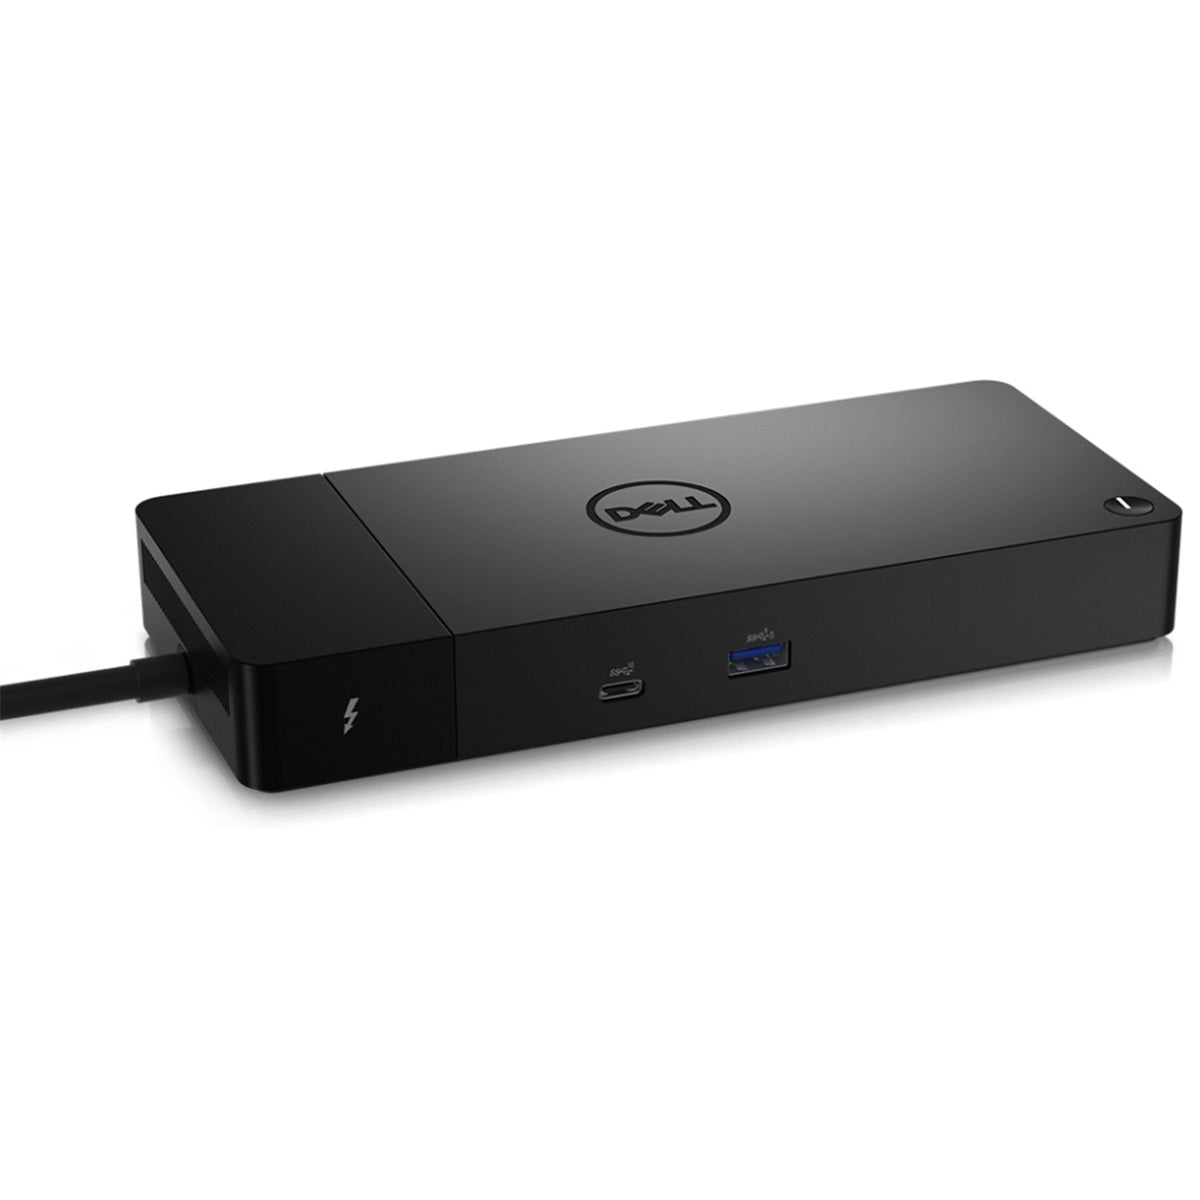 Brand New Dell Thunderbolt Dock WD22TB4 Quad 4K Docking Station 130W power delivery (Up to 90W to non-Dell system) – 3 Year Dell Warranty